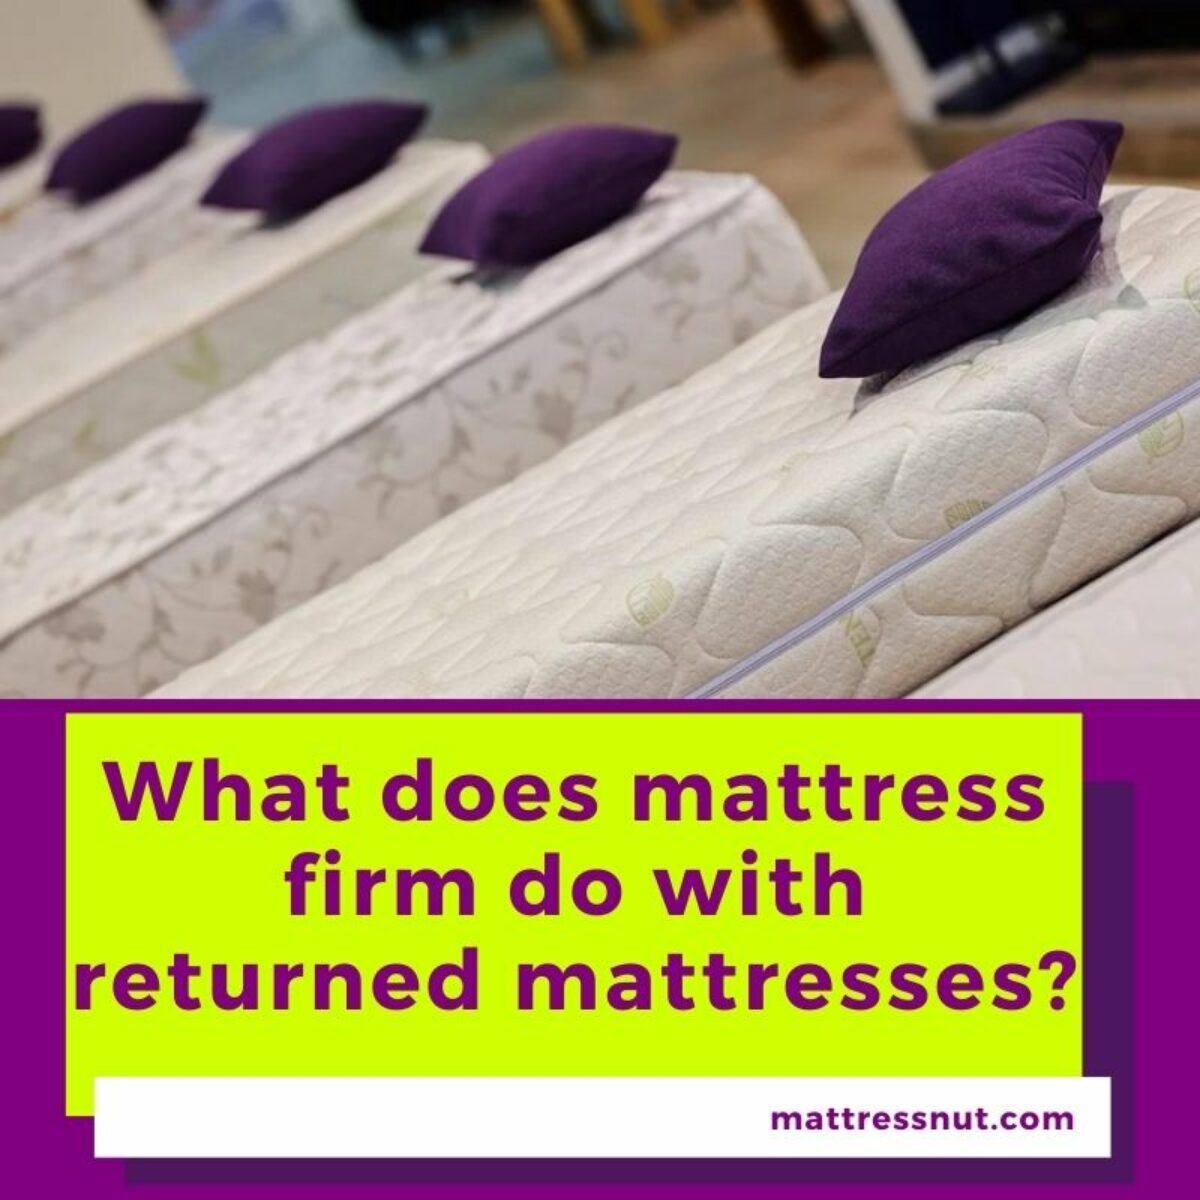 What Is The Mattress Firm Return Policy?